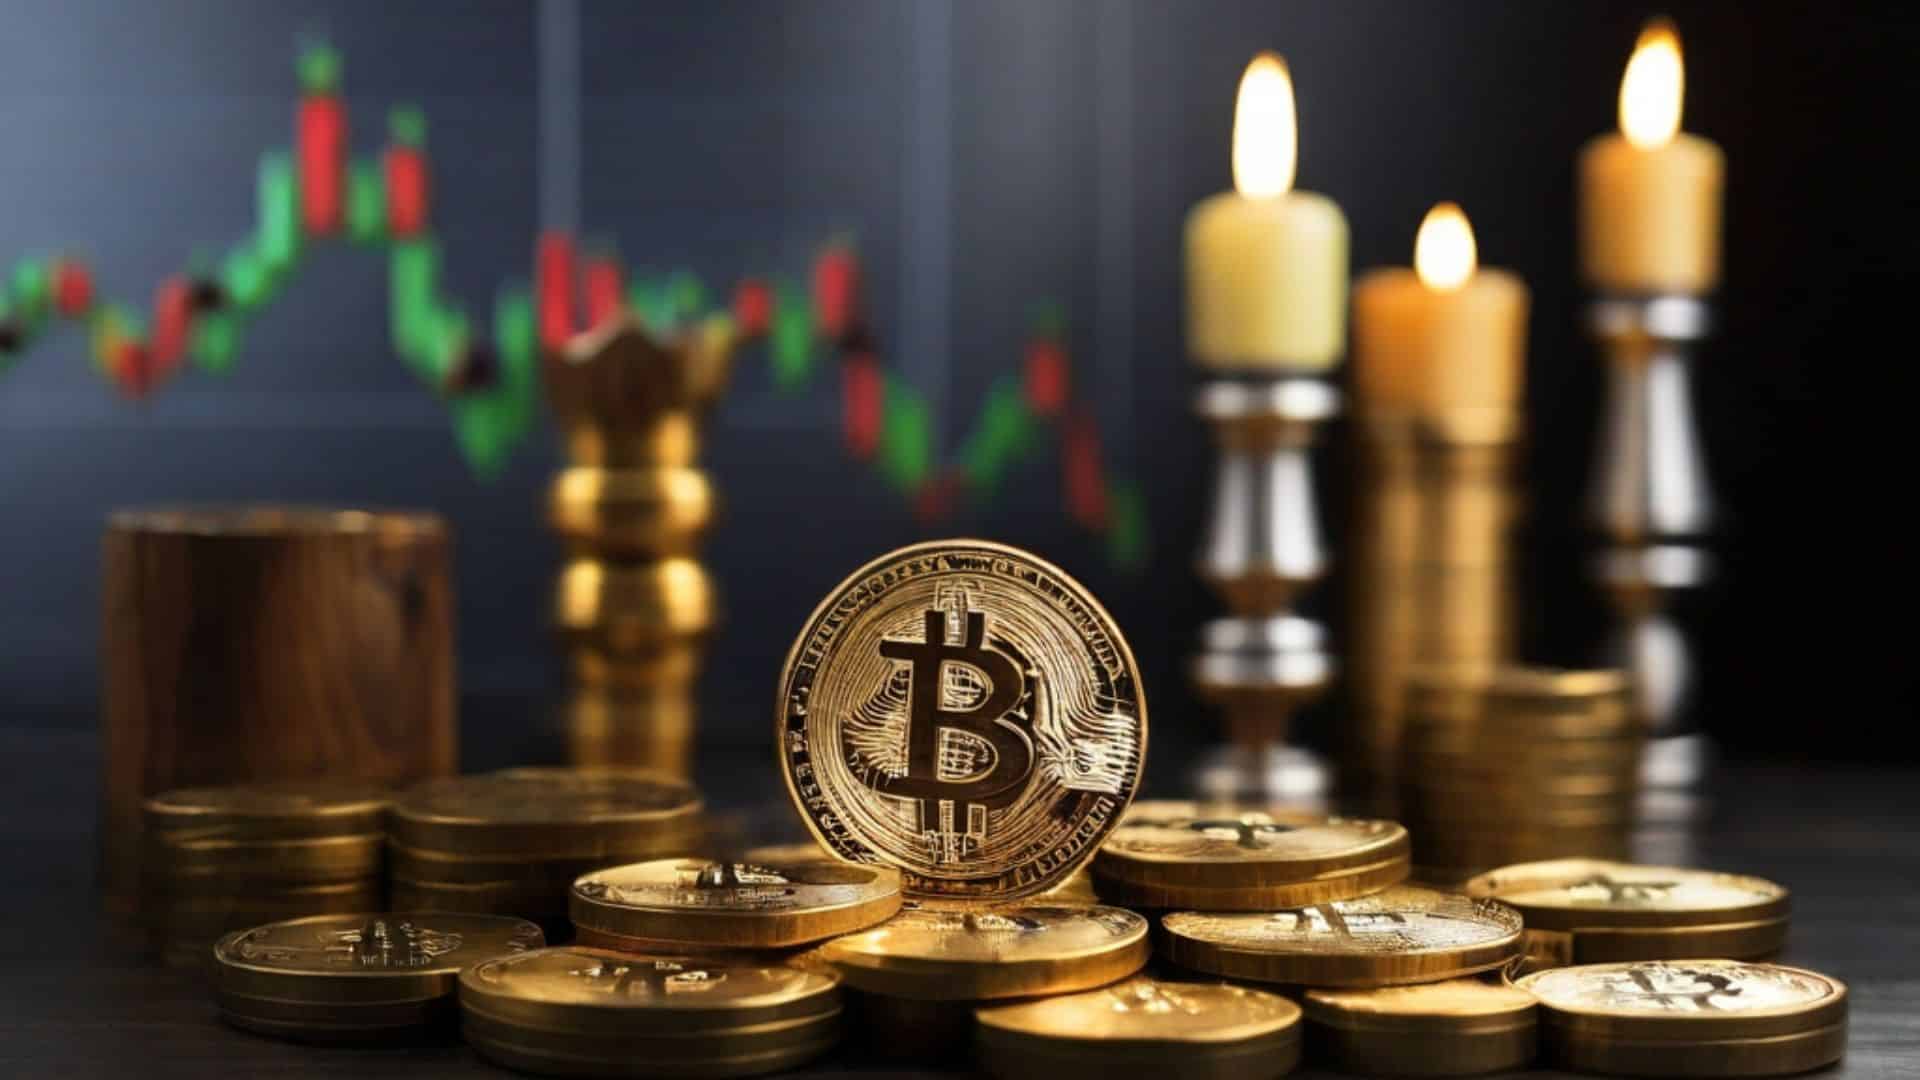 Bitcoin Price Prediction: BTC Briefly Breaks $70K To Record New ATH As Investors Flock To This Bitcoin Derivative With 159% APY